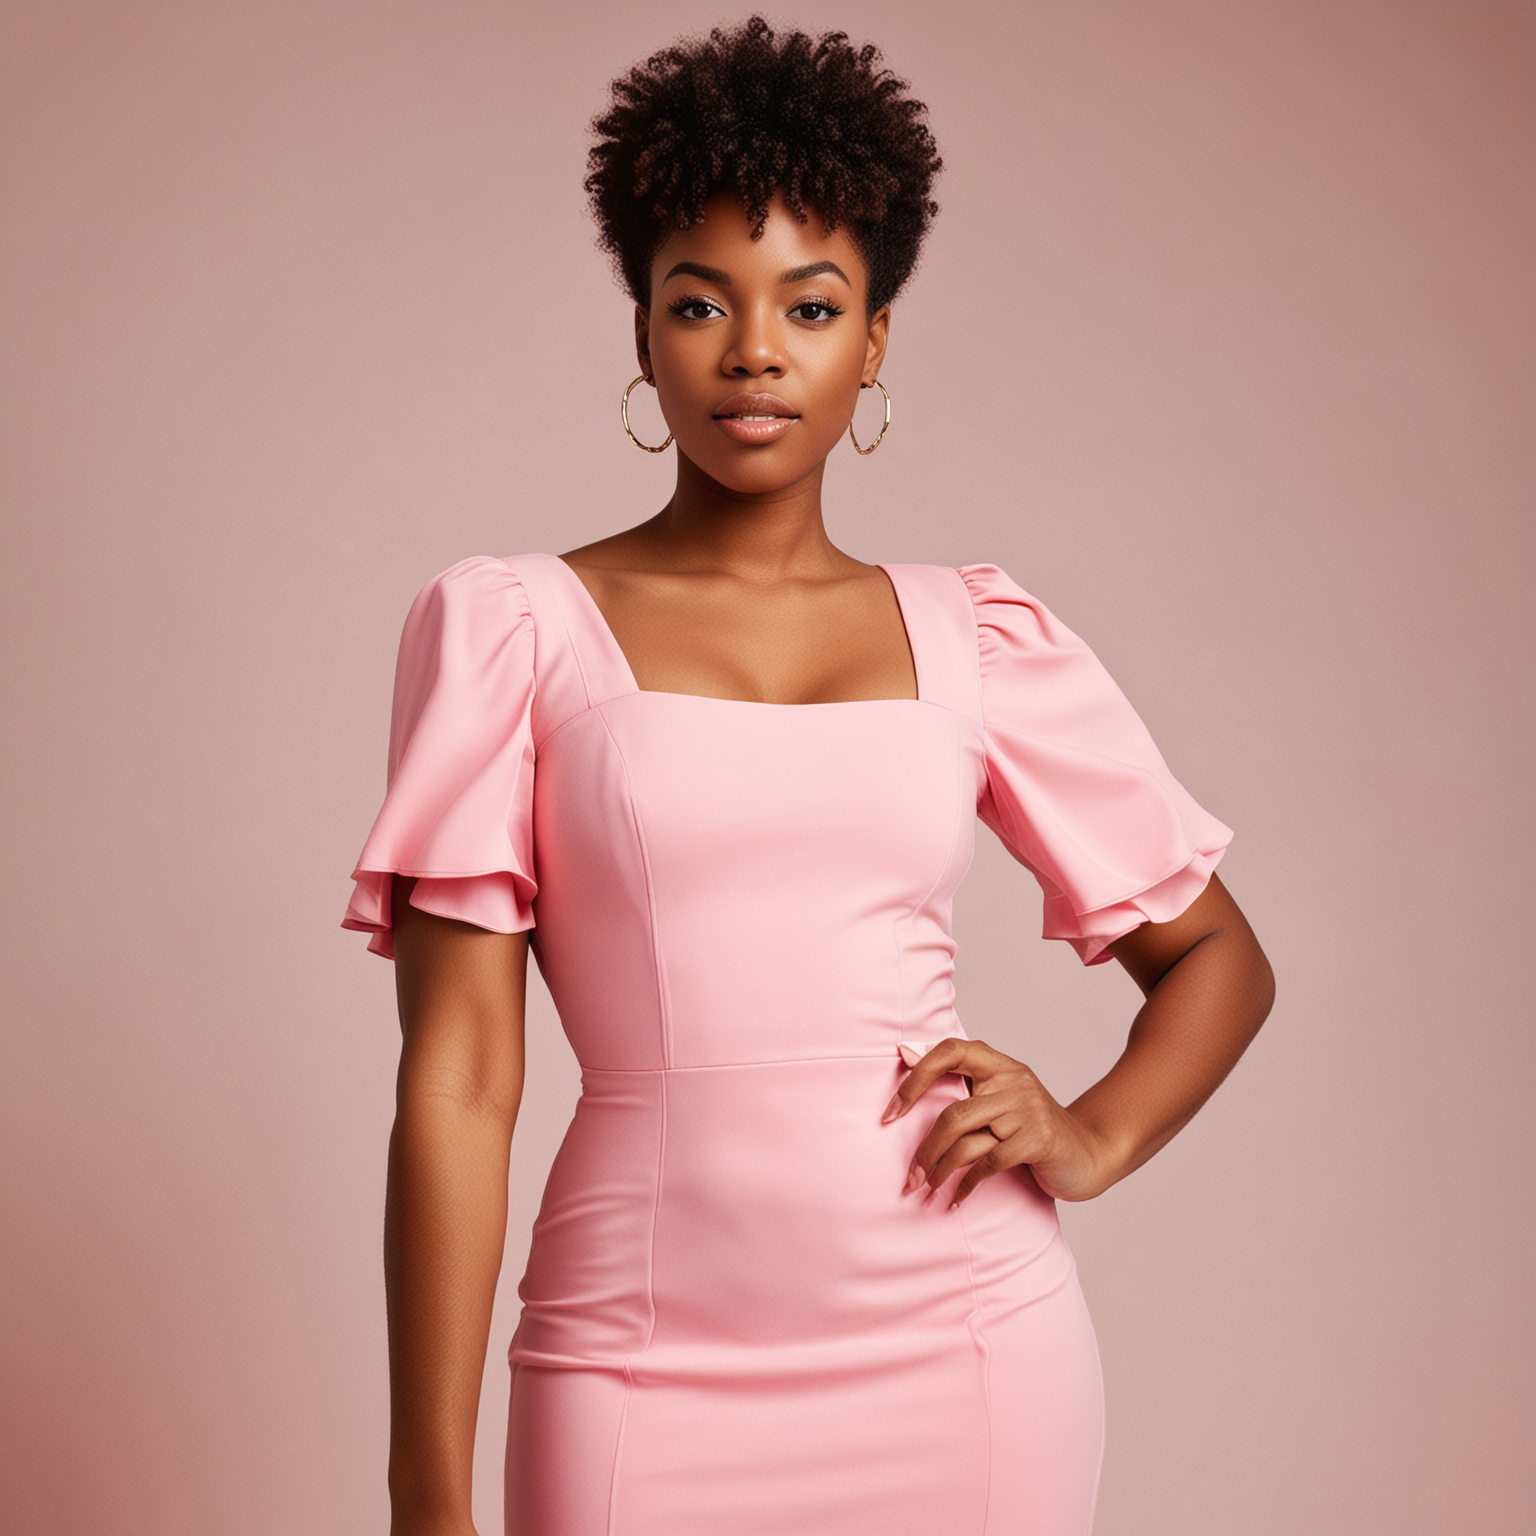 black woman in pink fitted dress
